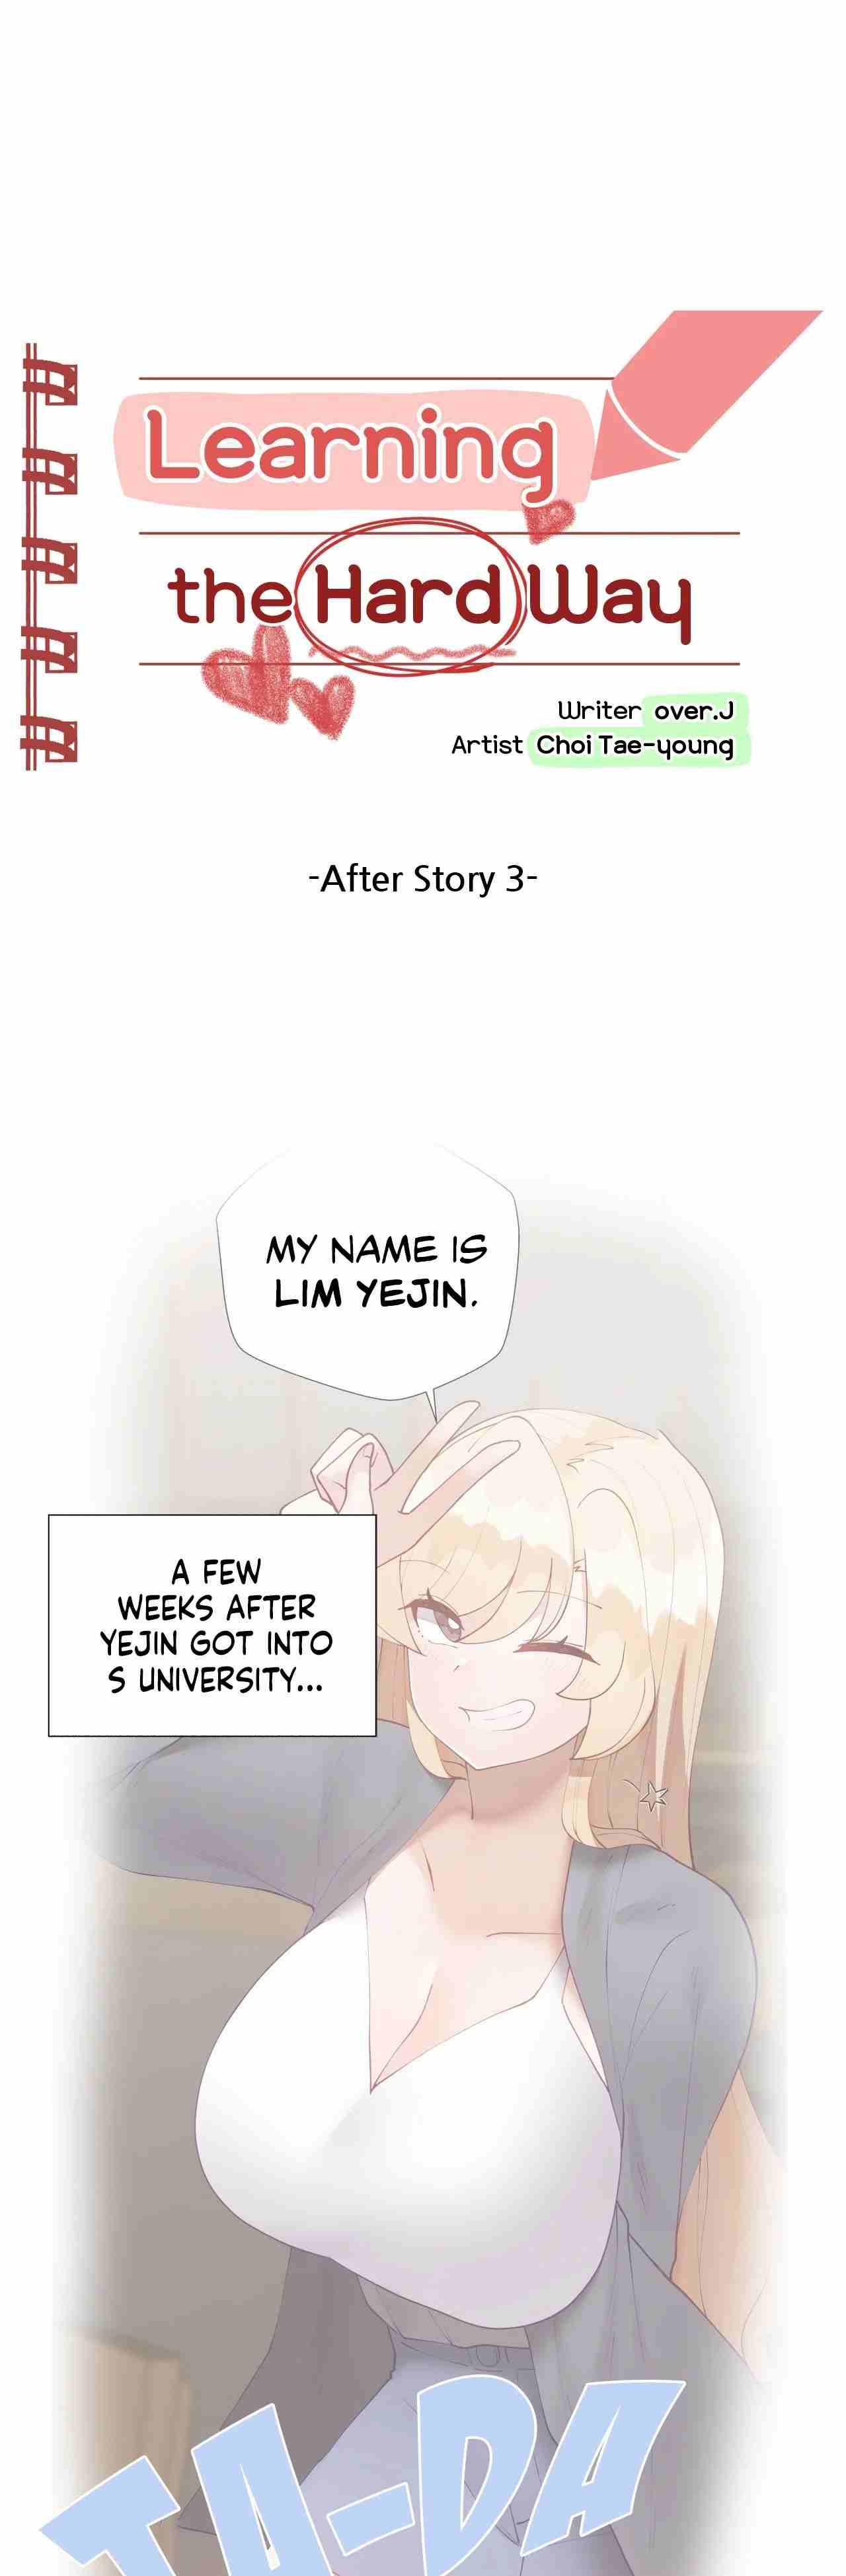 [Over.J, Choi Tae-young] Learning the Hard Way 2nd Season (After Story) Ch.4/? [English] [Manhwa PDF] Ongoing 93